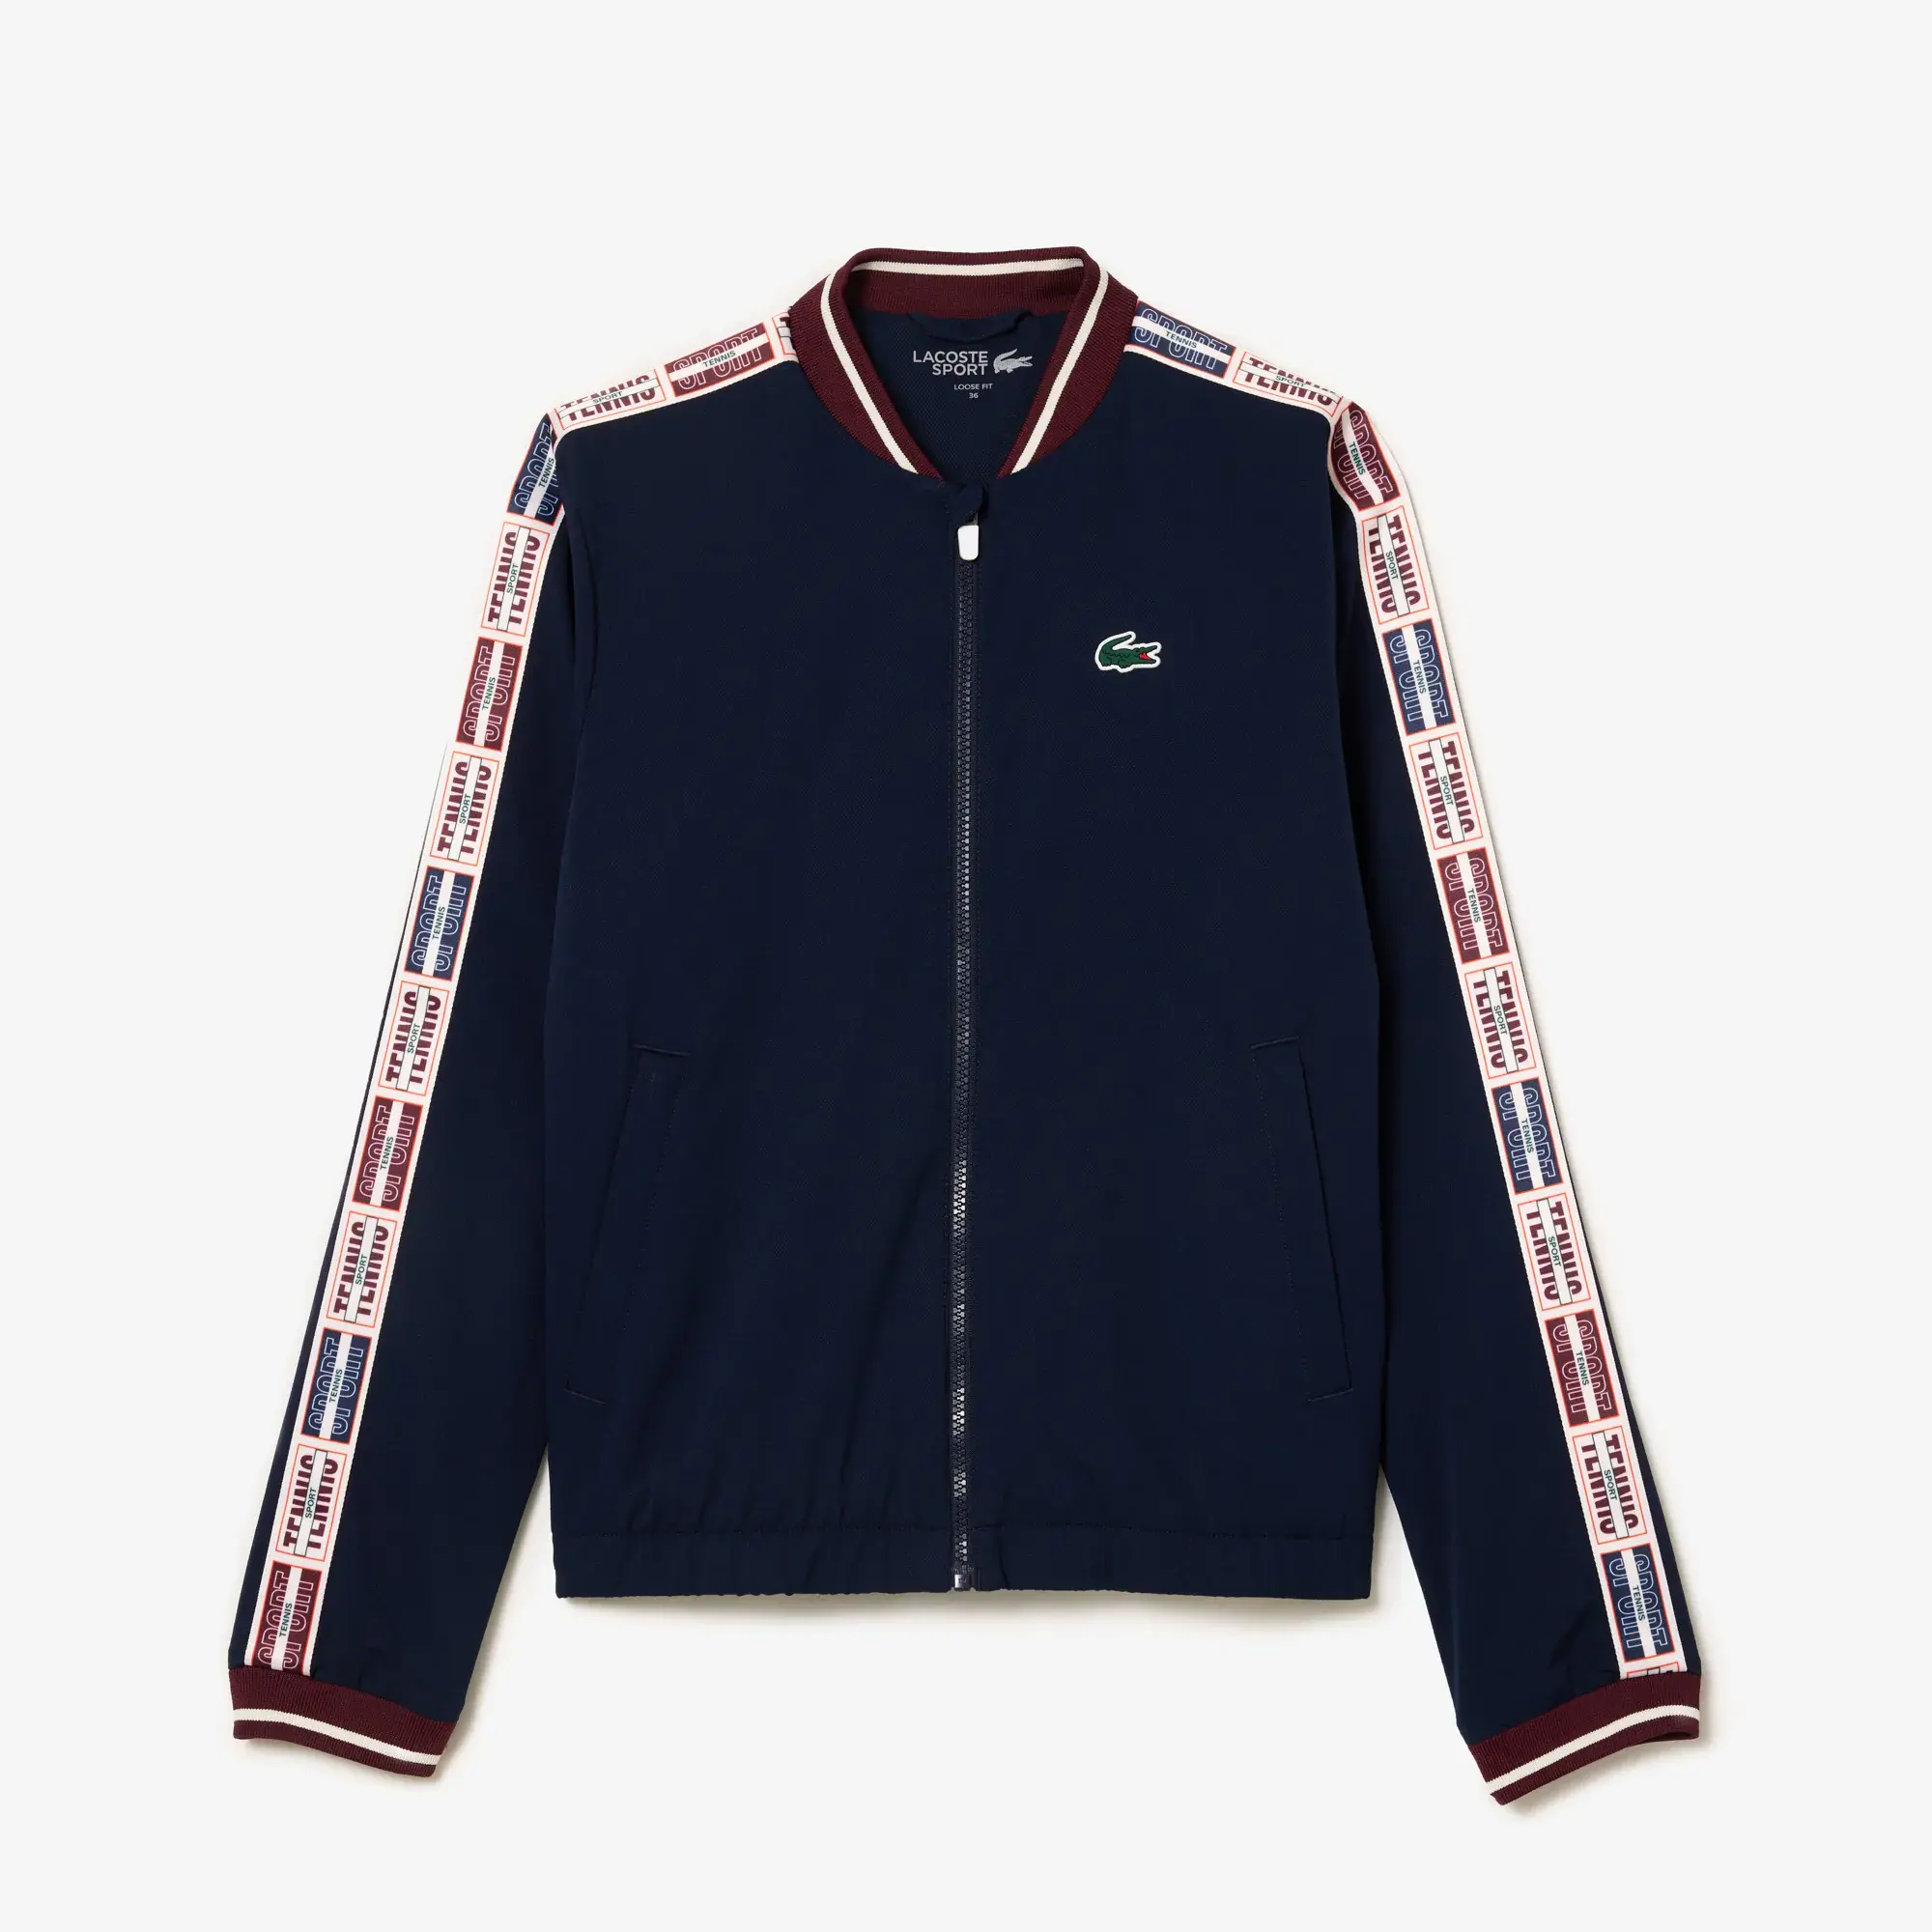 Lacoste Women's Recycled Fiber Stretch Tennis Jacket. 1